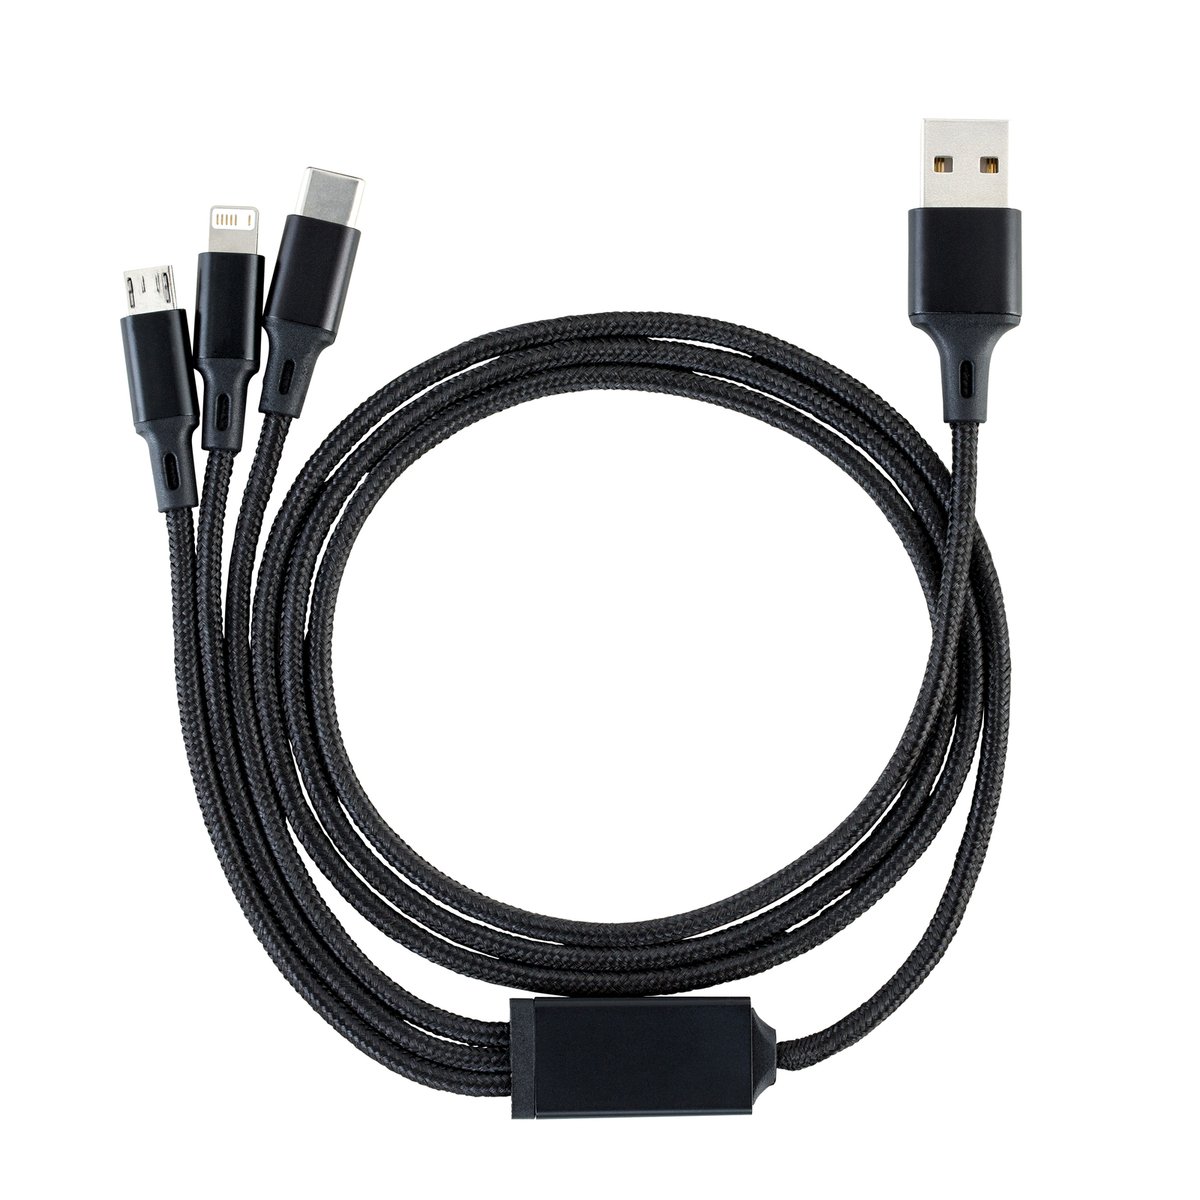 3-in-1 Charging Cable with Light REEVES-HAMPTON black